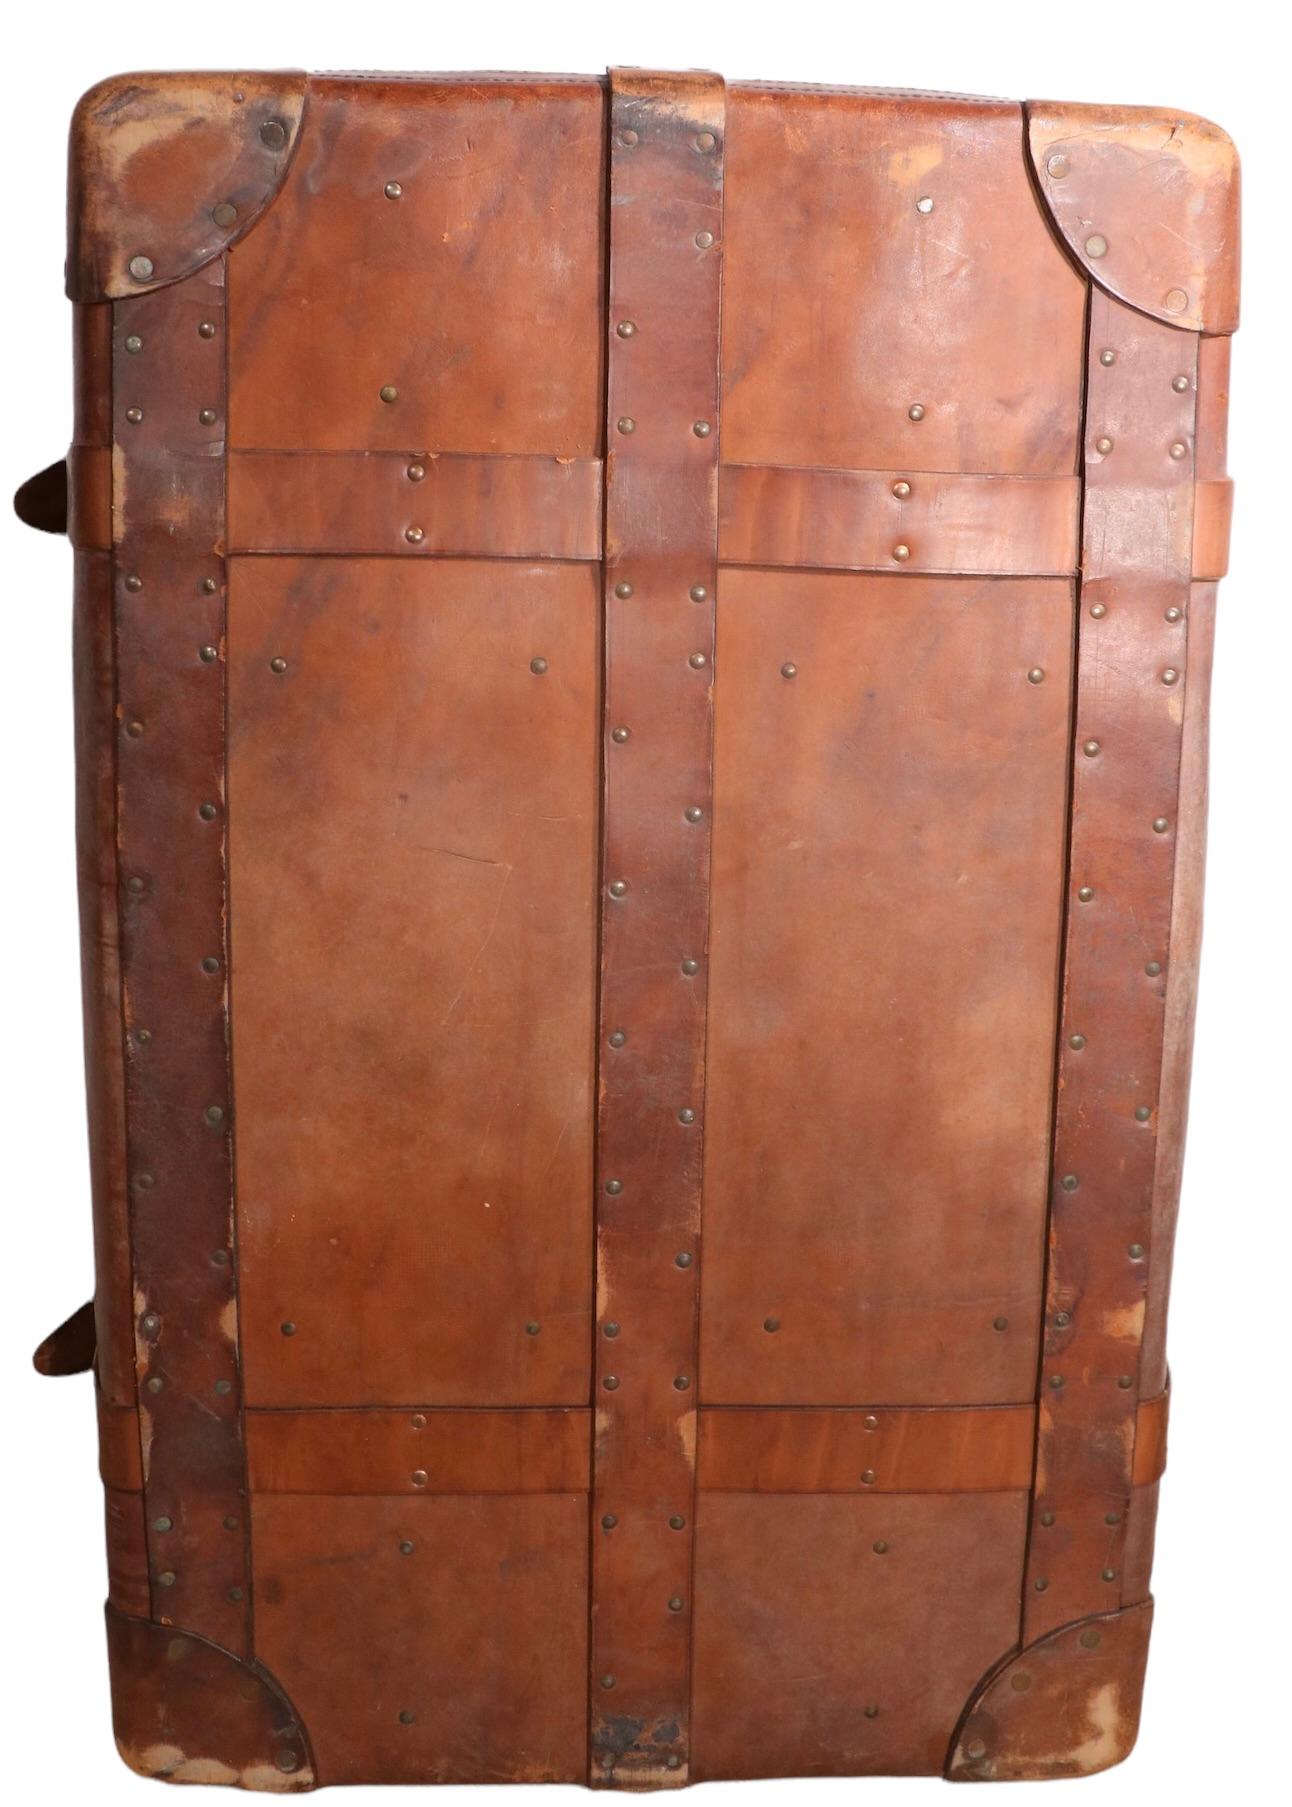 Large Leather Trunk by M. Wurzl & Sohne Made in Budapest, Karlsbad 5